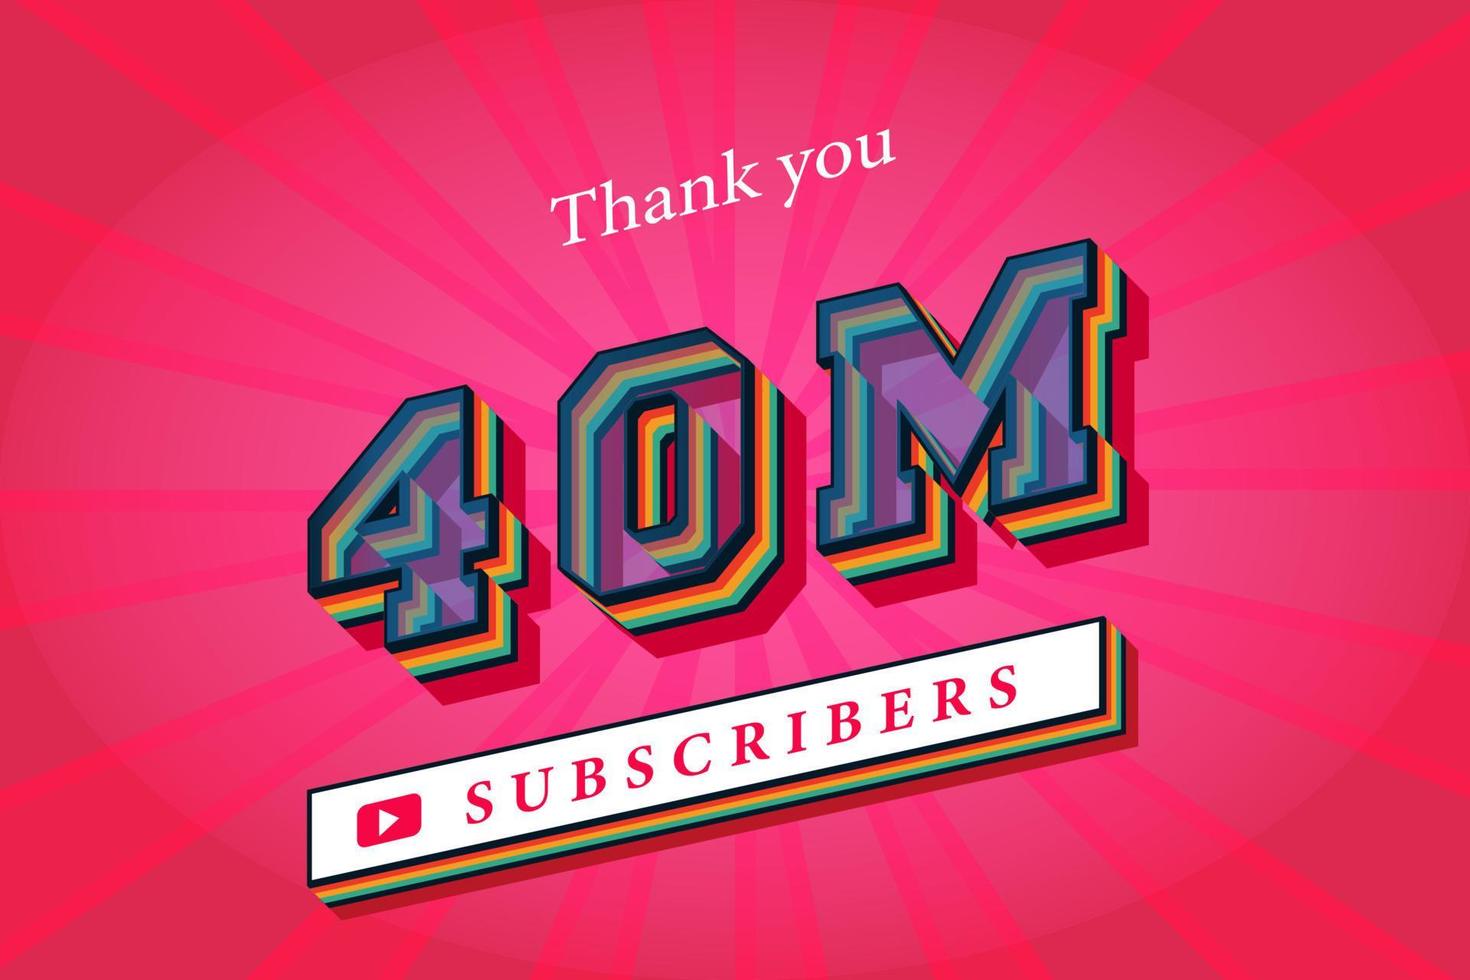 40m subscribers celebration thank you social media banner. 40 million subscribers 3d rendering vector